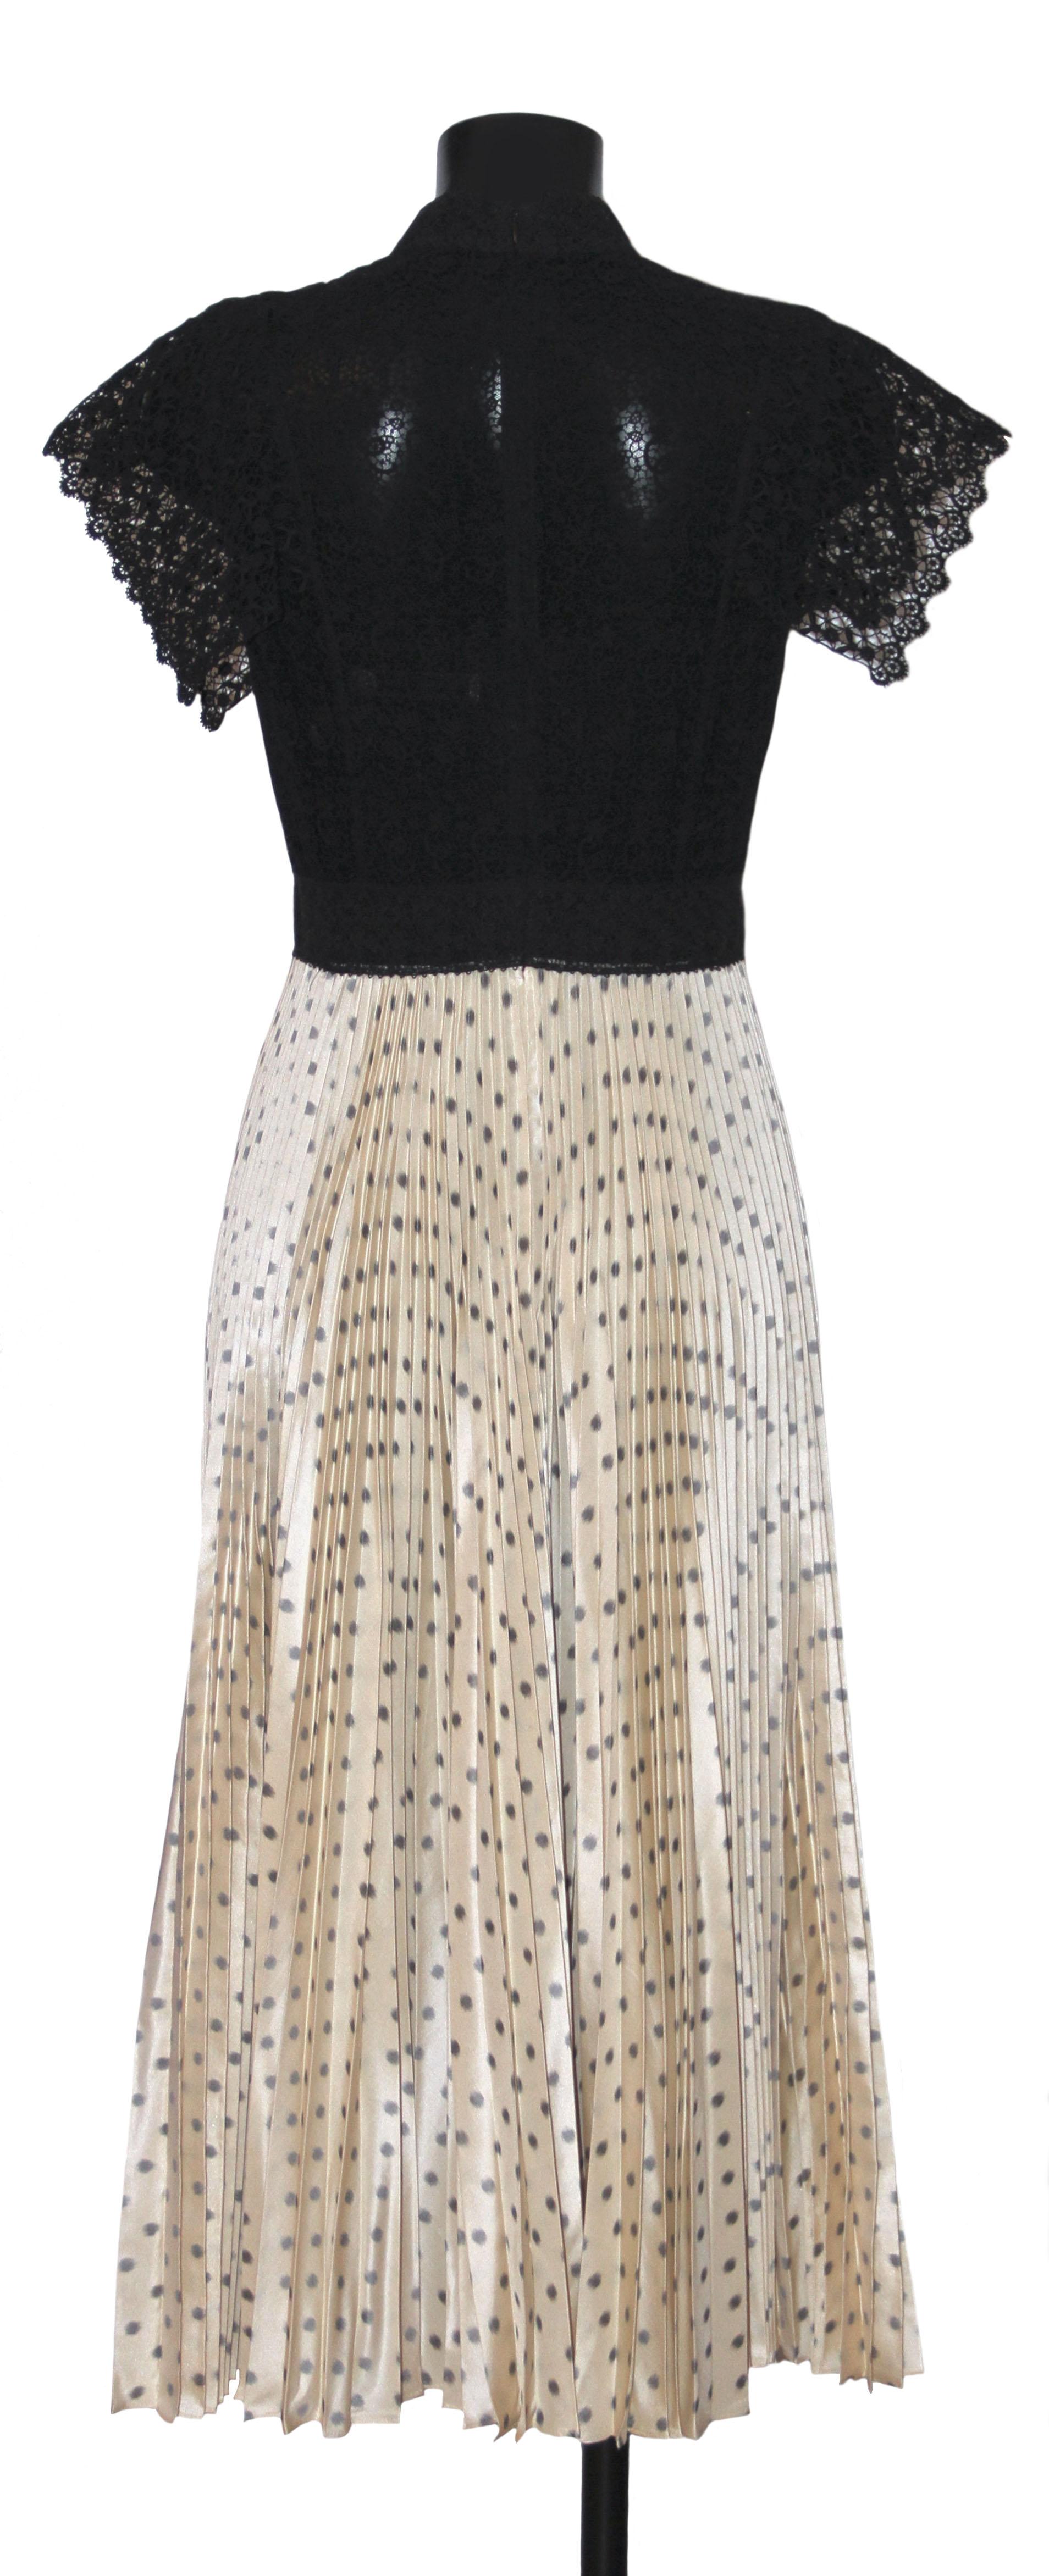 This superb Christian Dior dress is evoking the exceptional craftsmanship of Haute Couture with Polka dots and pleats, favourites of the House.
It features a black cotton intricate knit high-neck top and a full pleated ivory (with black polka dots)